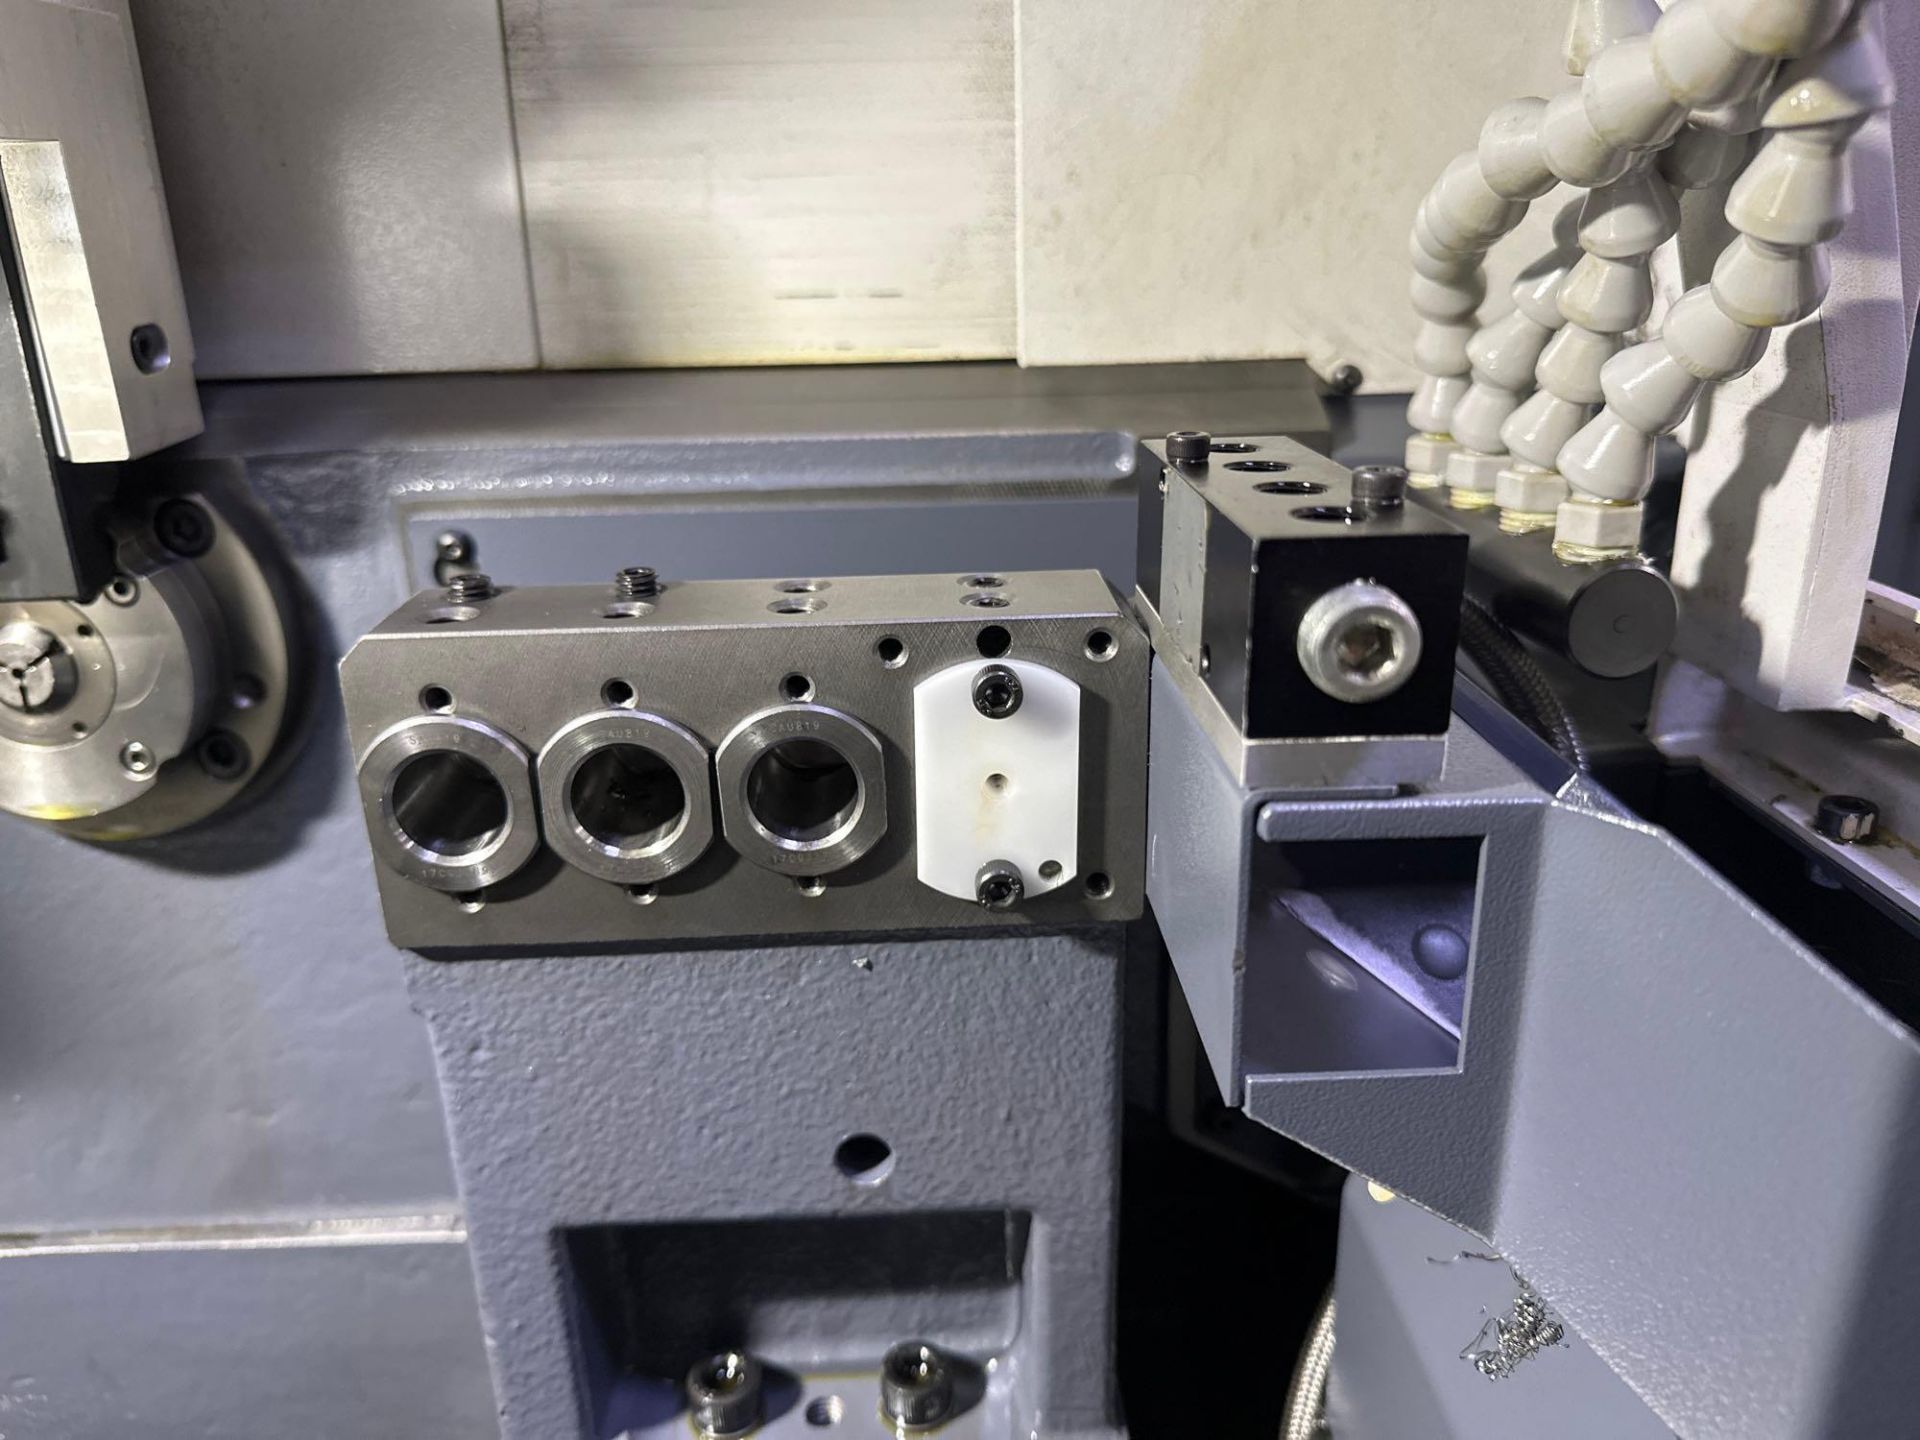 Citizen L12-1M7 6-Axis Swiss CNC Lathe, 18 Station Tool Holders *Delayed for sale in July* - Image 7 of 14